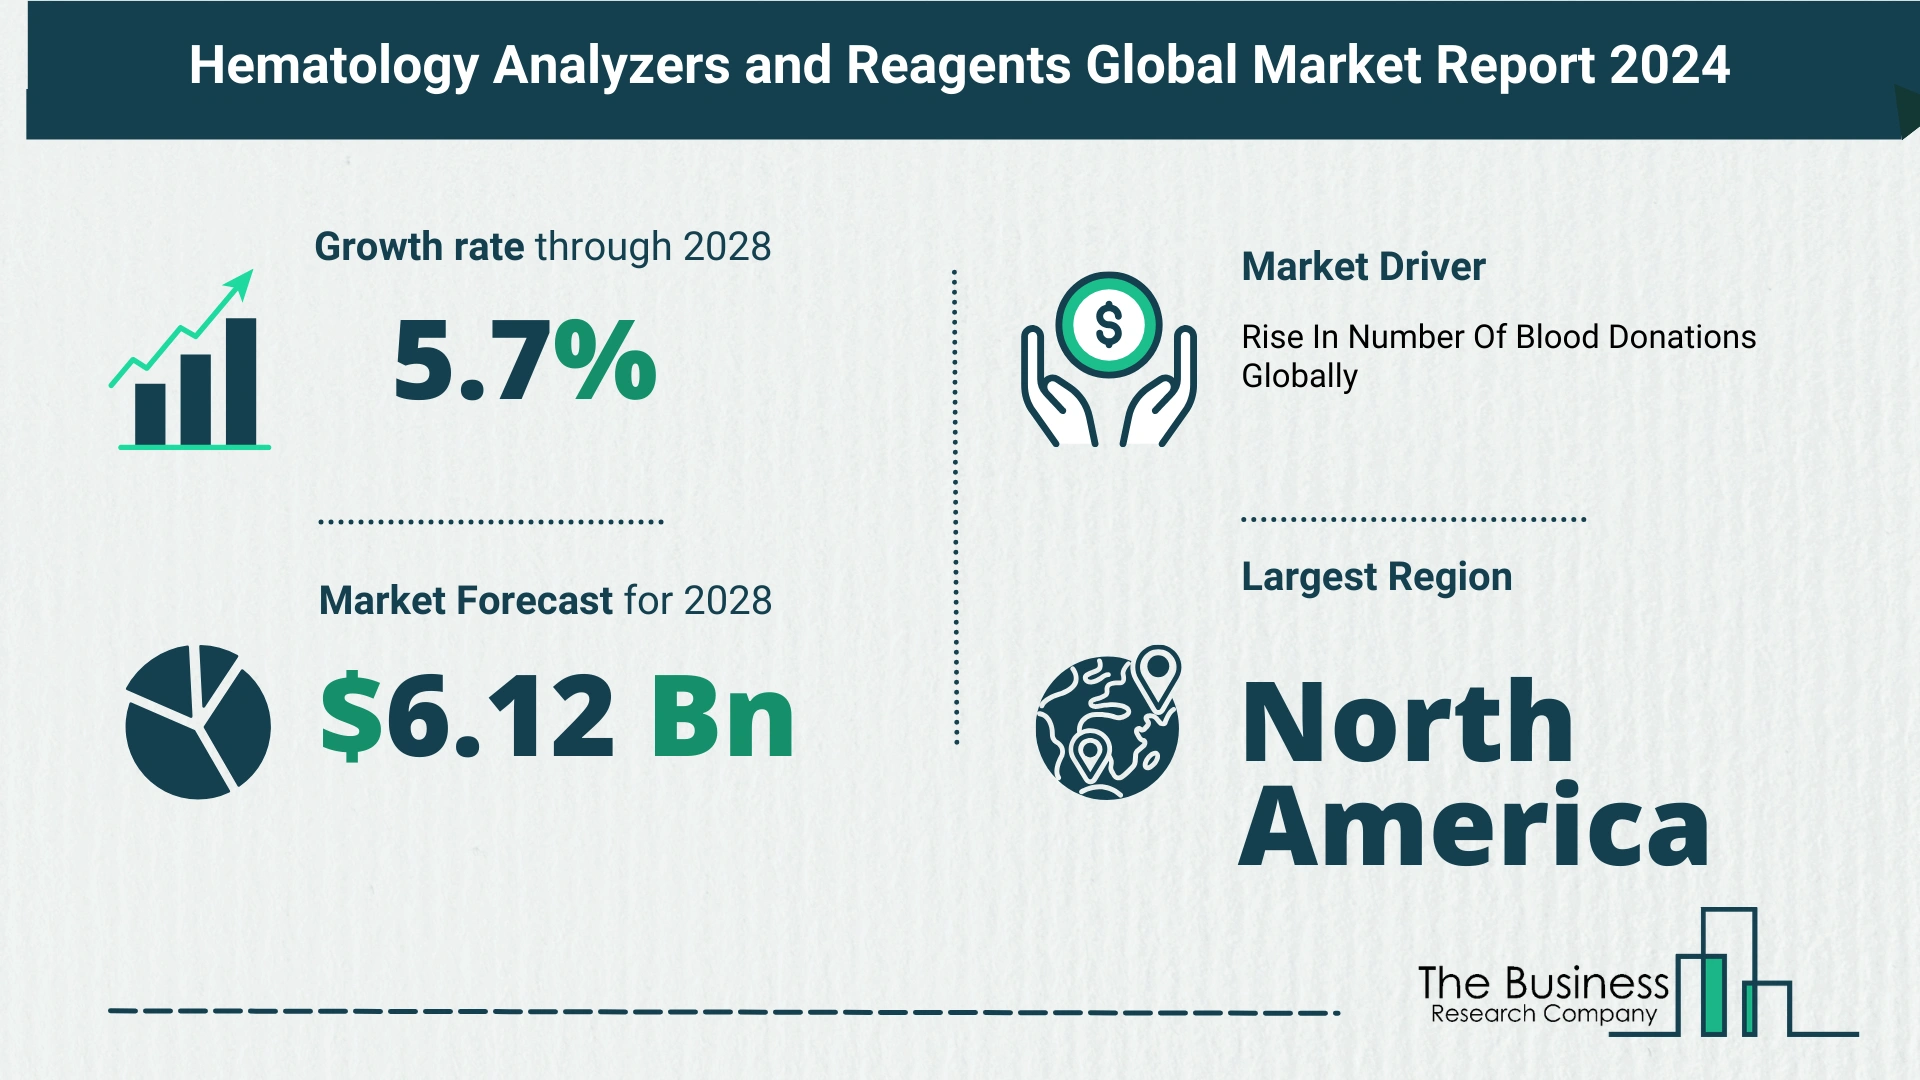 Overview Of The Hematology Analyzers and Reagents Market 2024: Size, Drivers, And Trends